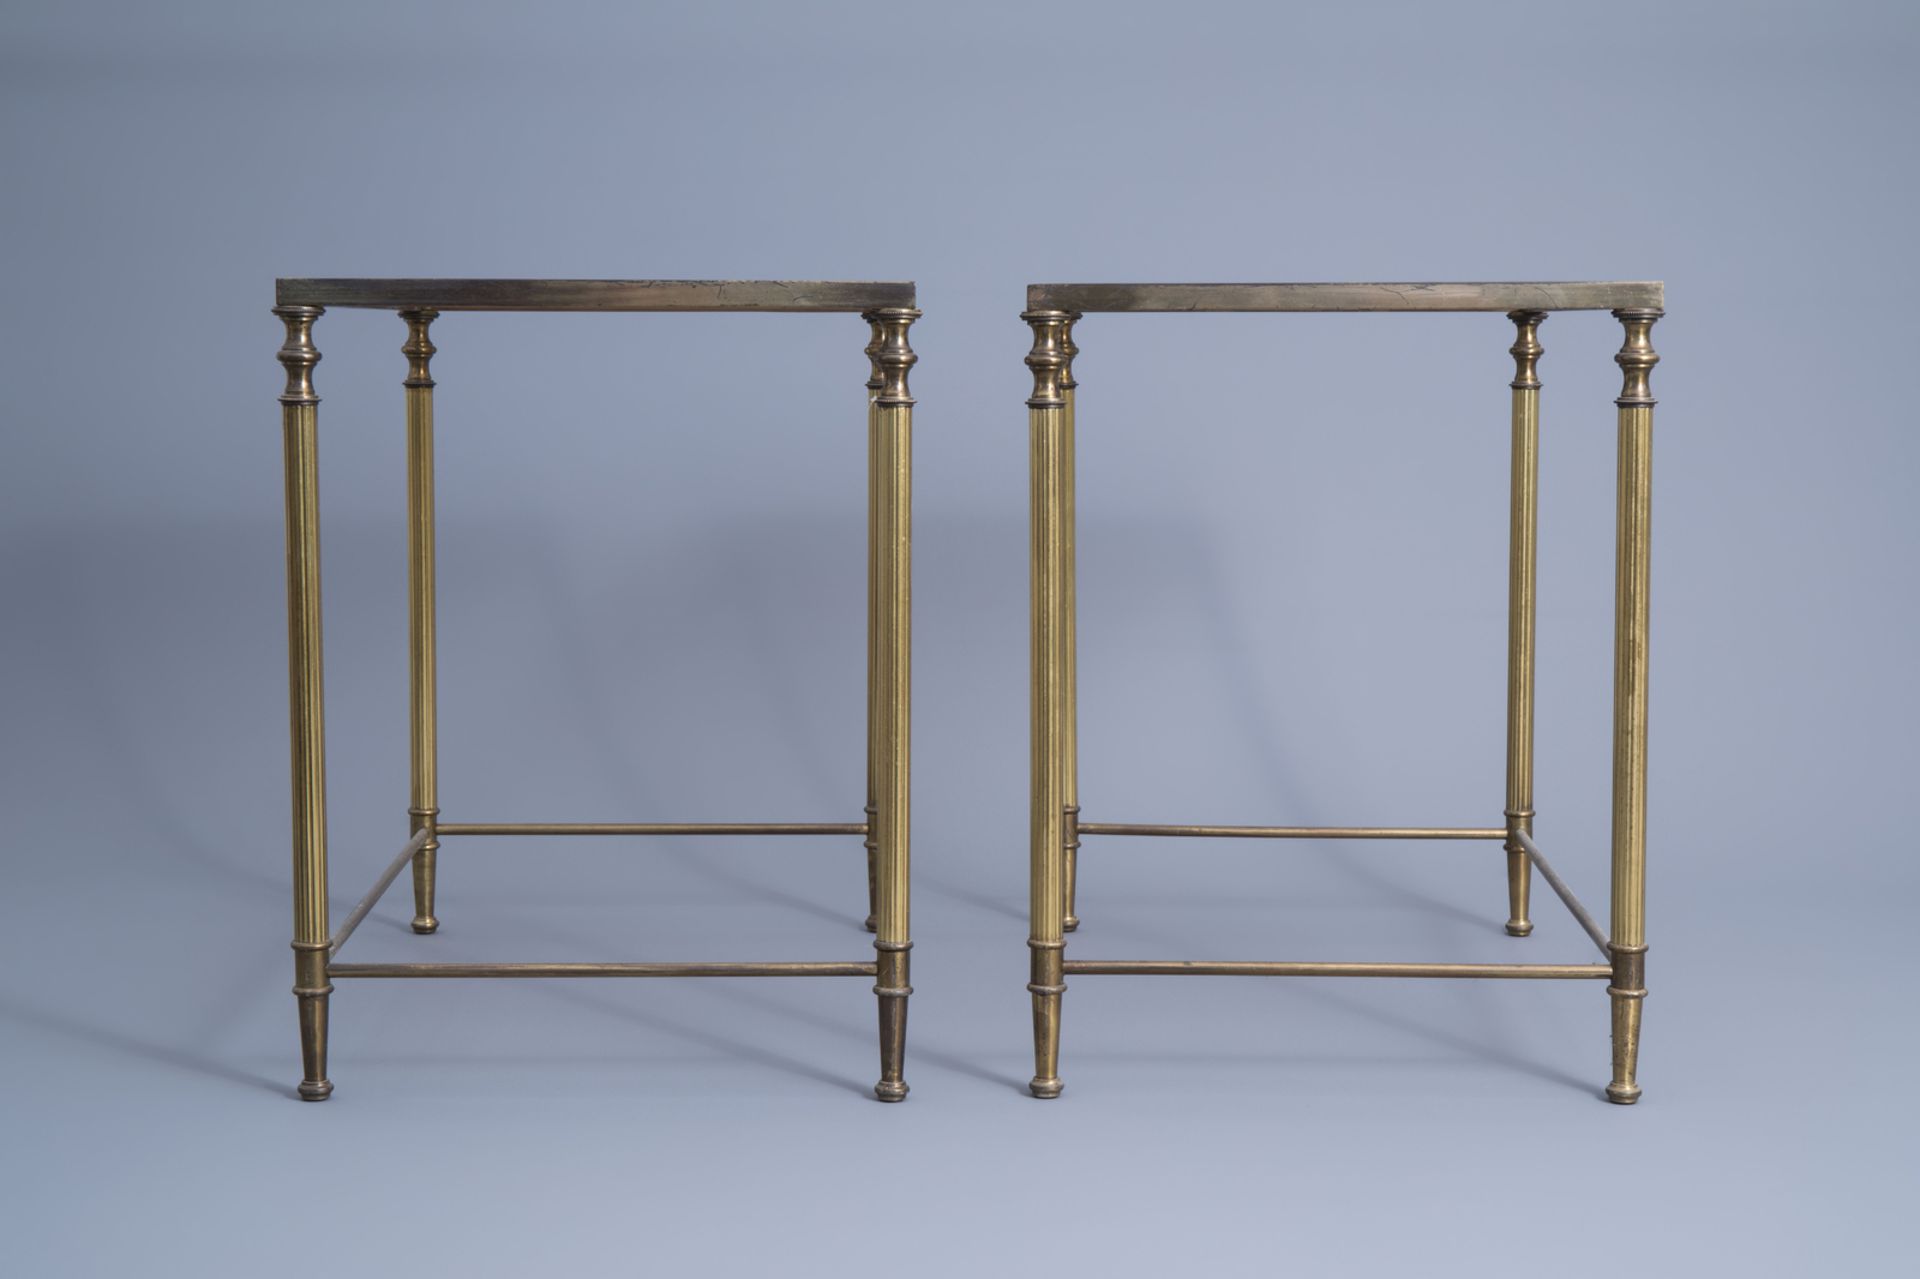 Two sets of three Maison Jansen rectangular gigogne side tables with a glass top, France, 1970's - Image 11 of 19